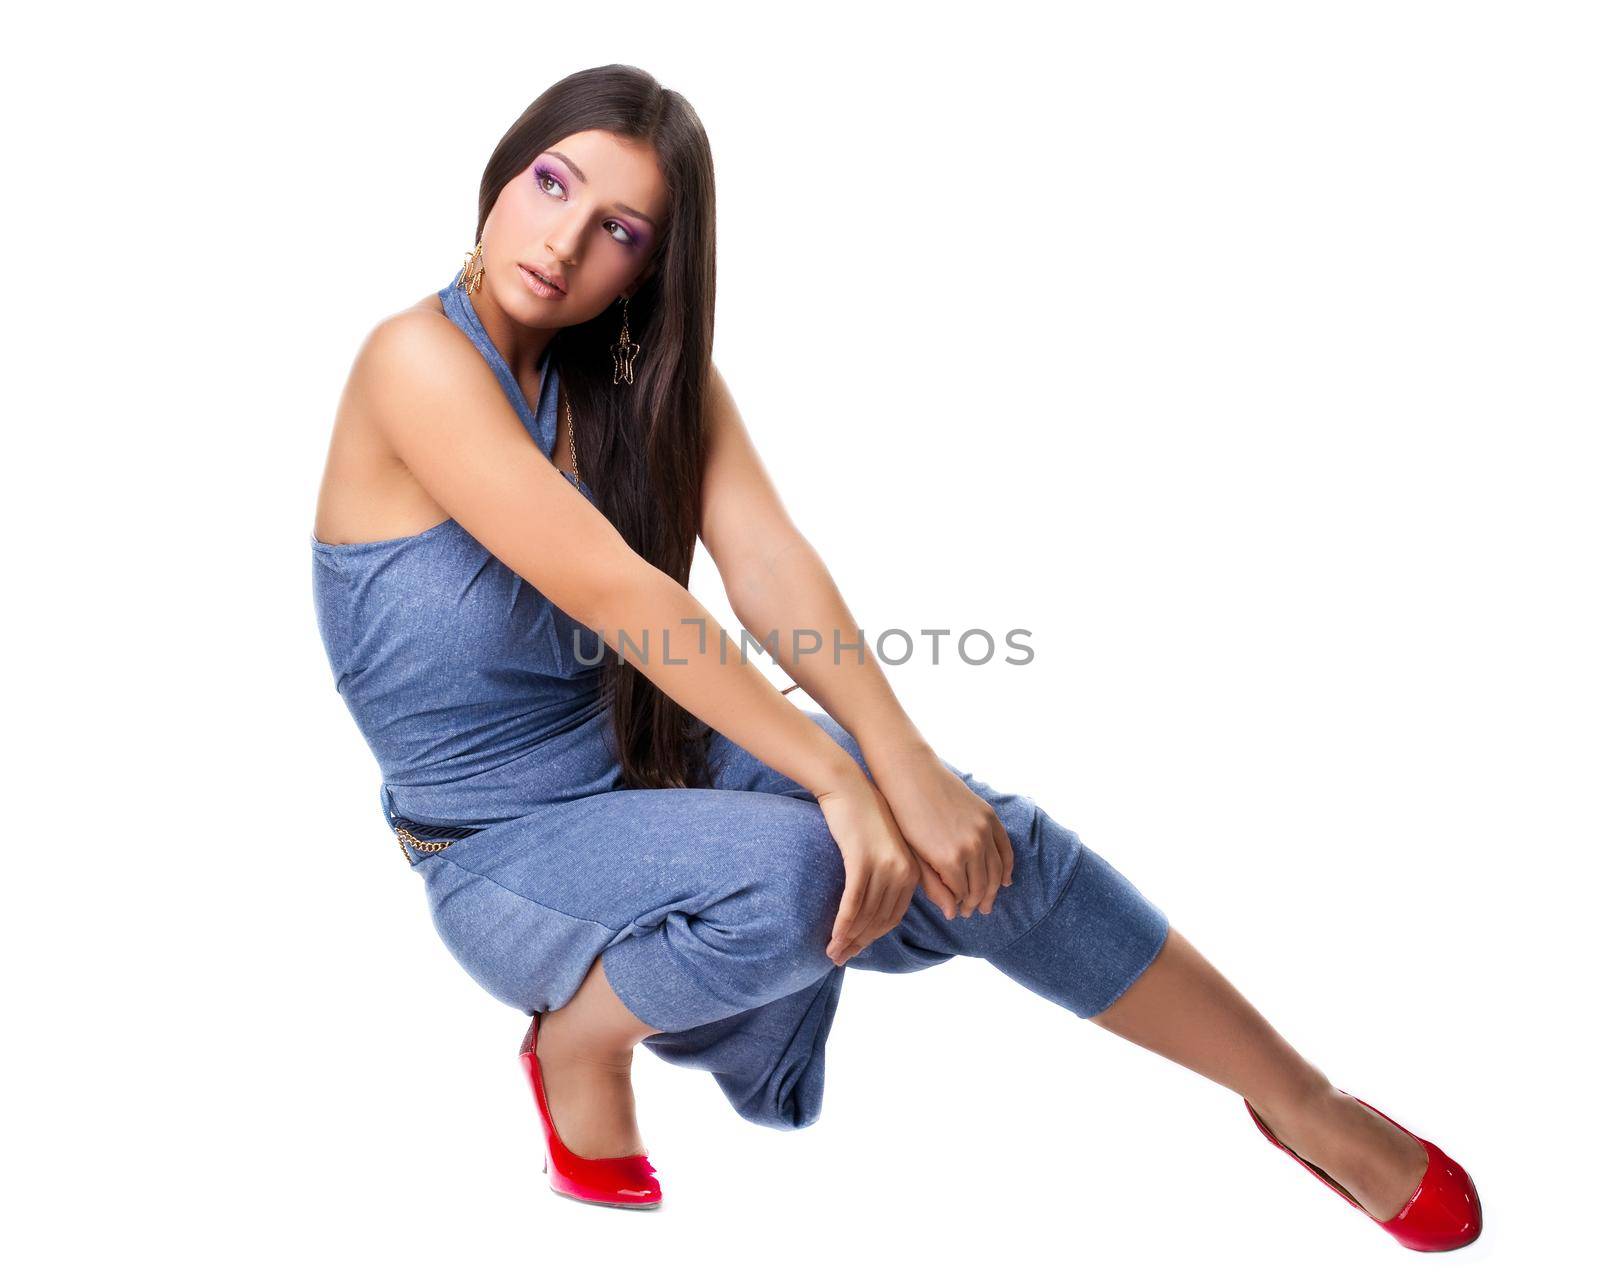 Sexy girl posing in rnb style cloth by rivertime